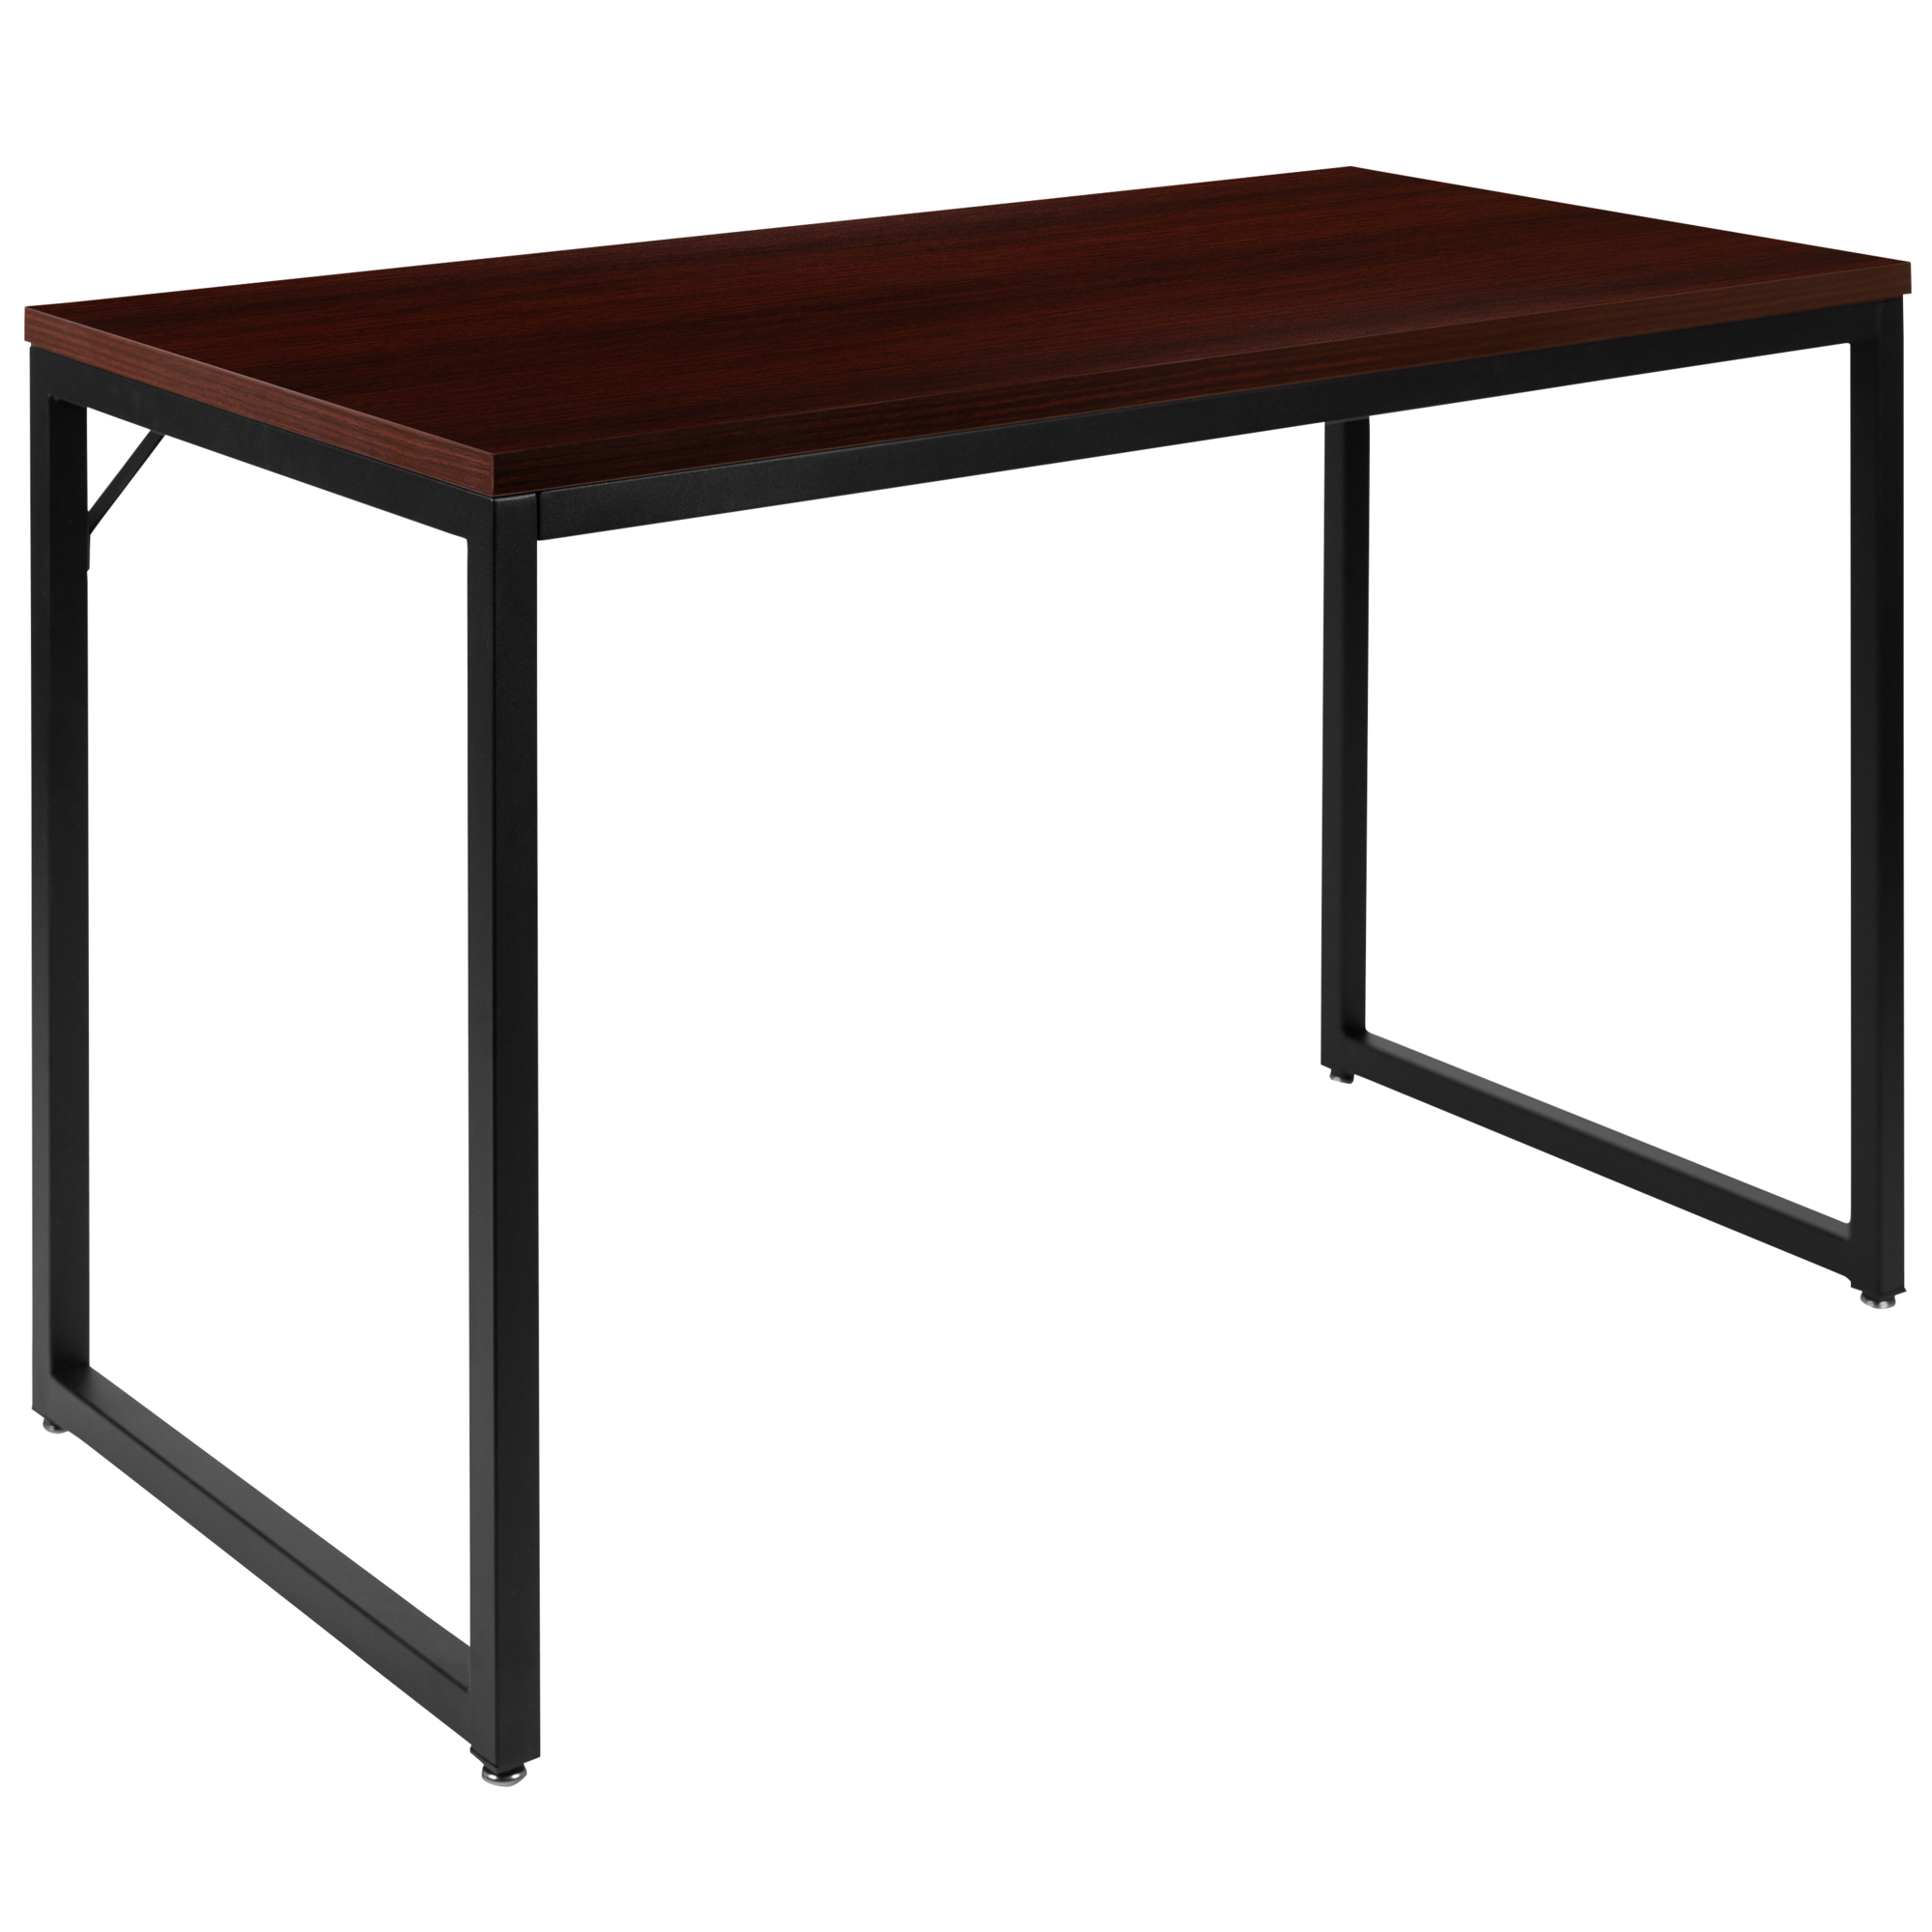 Flash Furniture, 47Inch L Commercial Industrial Office Desk in Mahogany, Width 47.25 in, Height 29.5 in, Depth 23.5 in, Model GCGF15612MHG